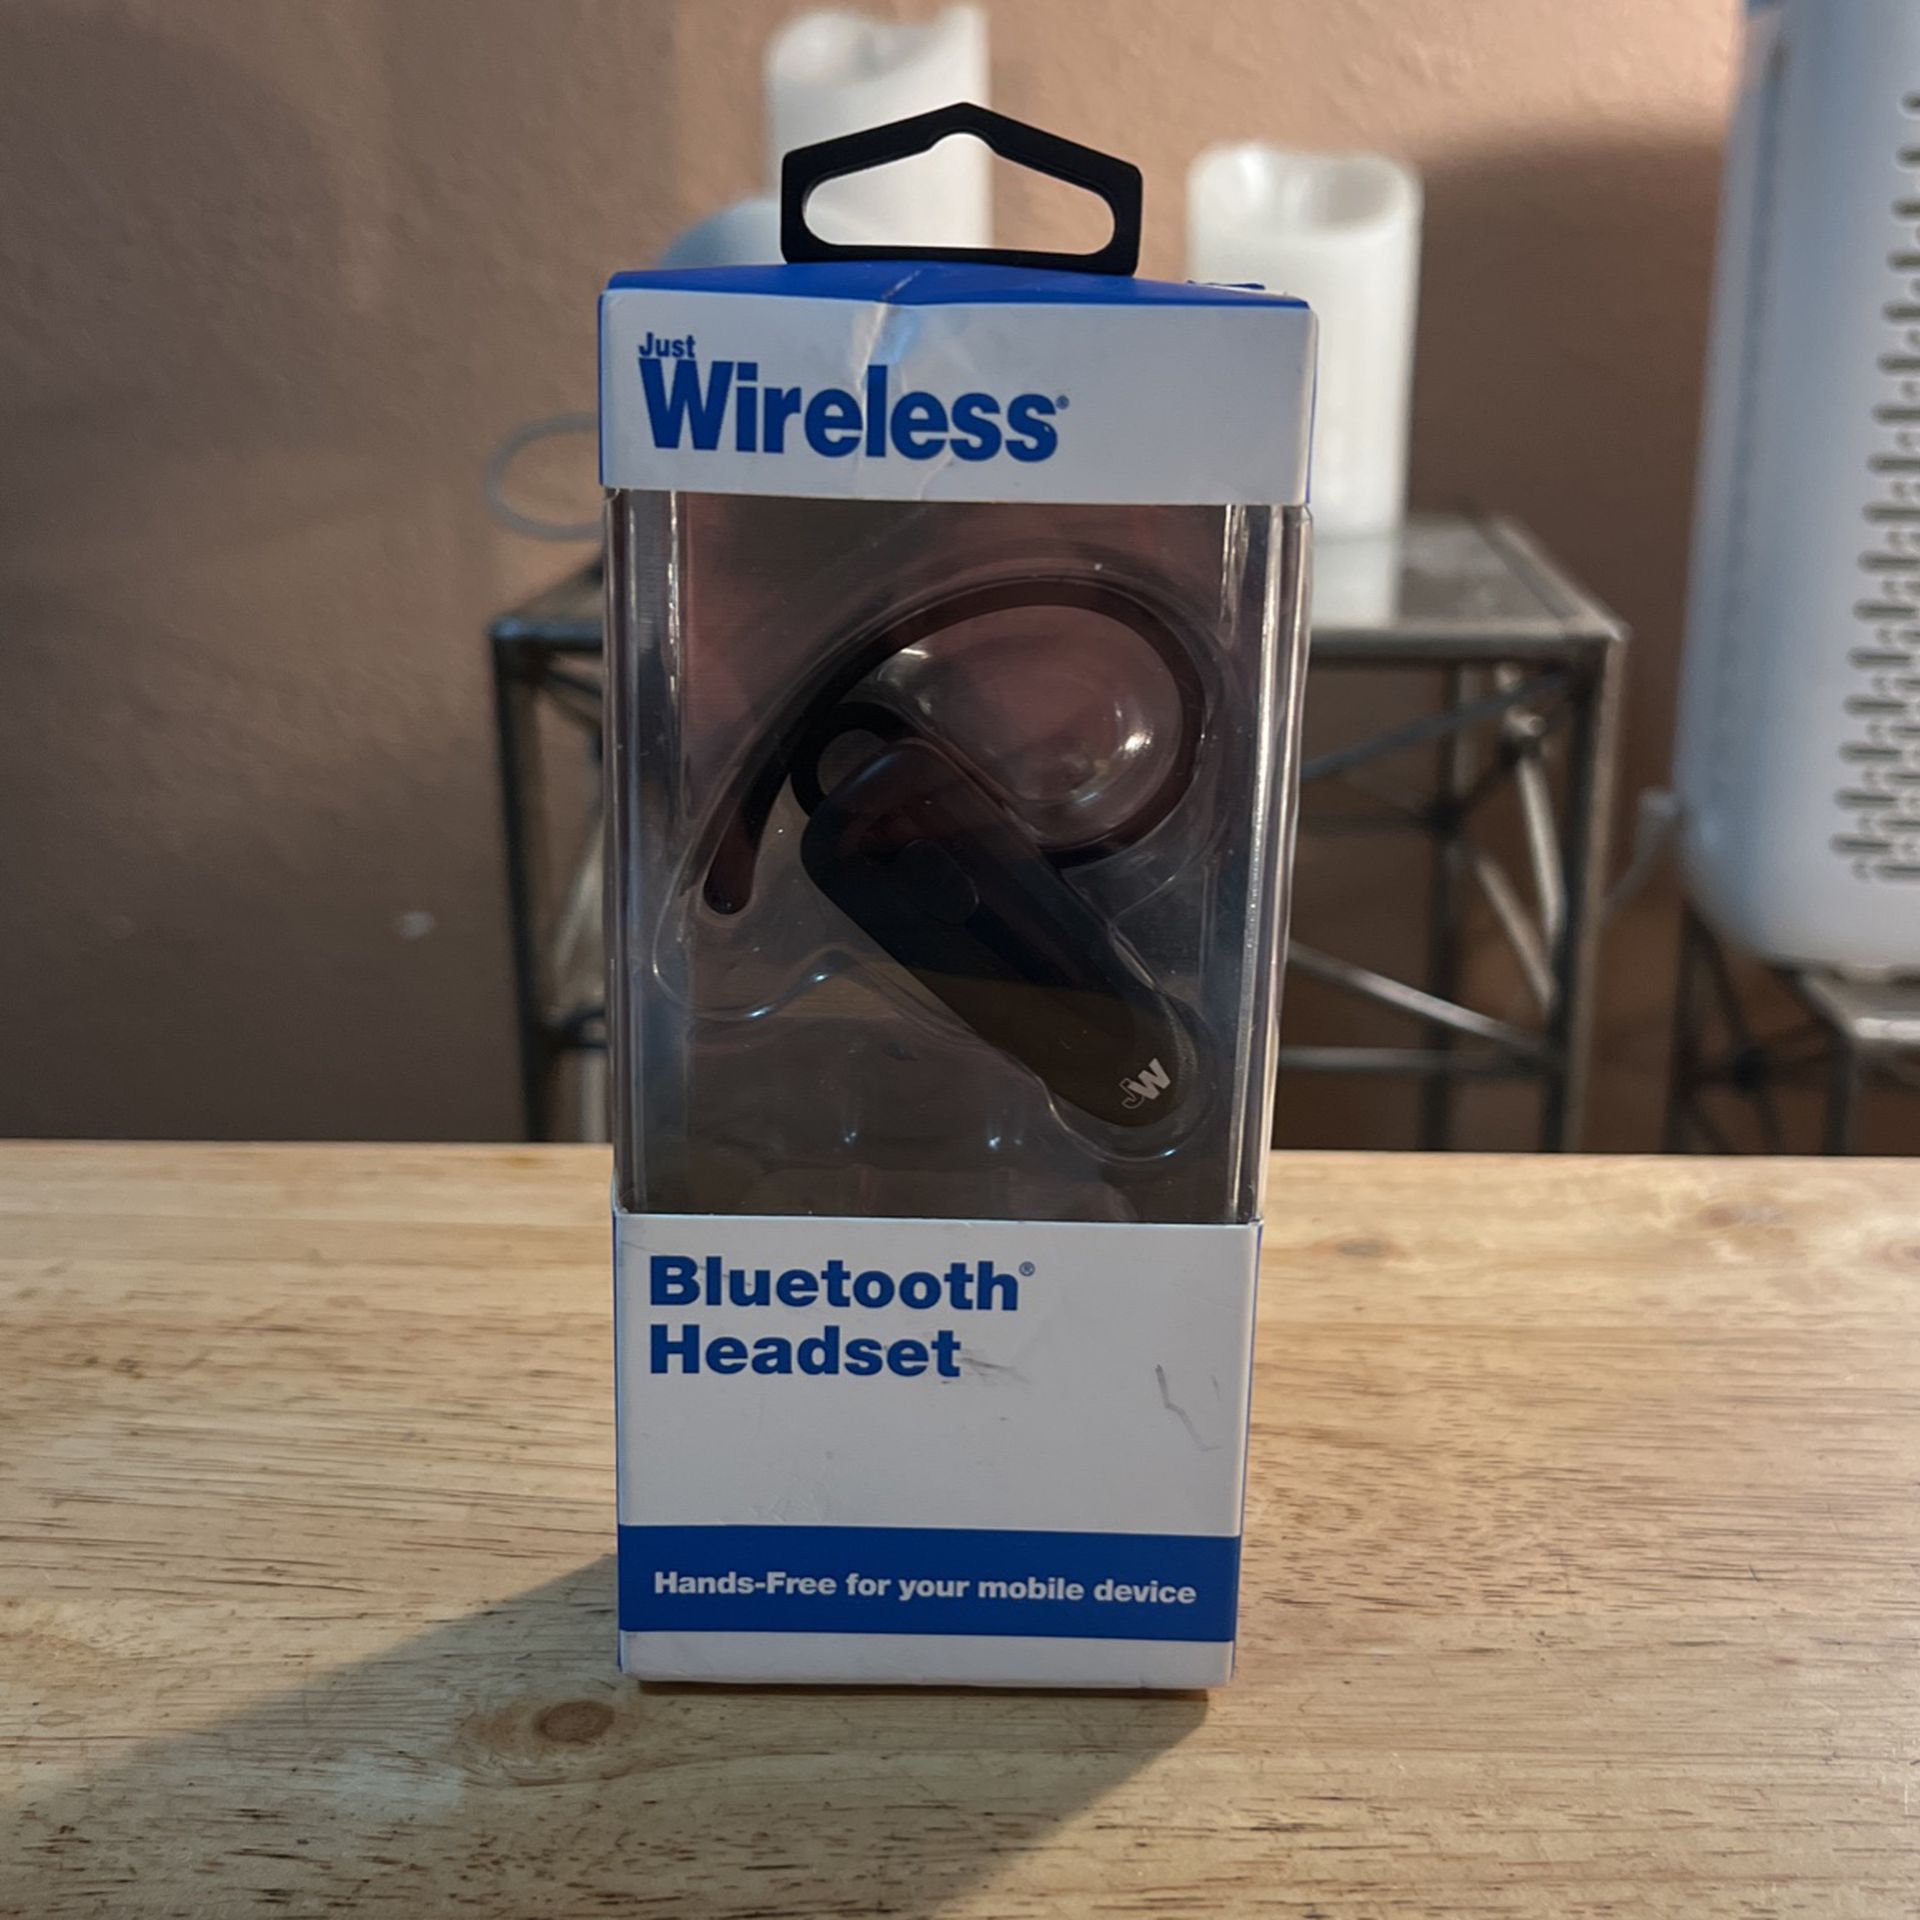 New Wireless Bluetooth Headset hands Free For Ur Mobile Device $8 Firm